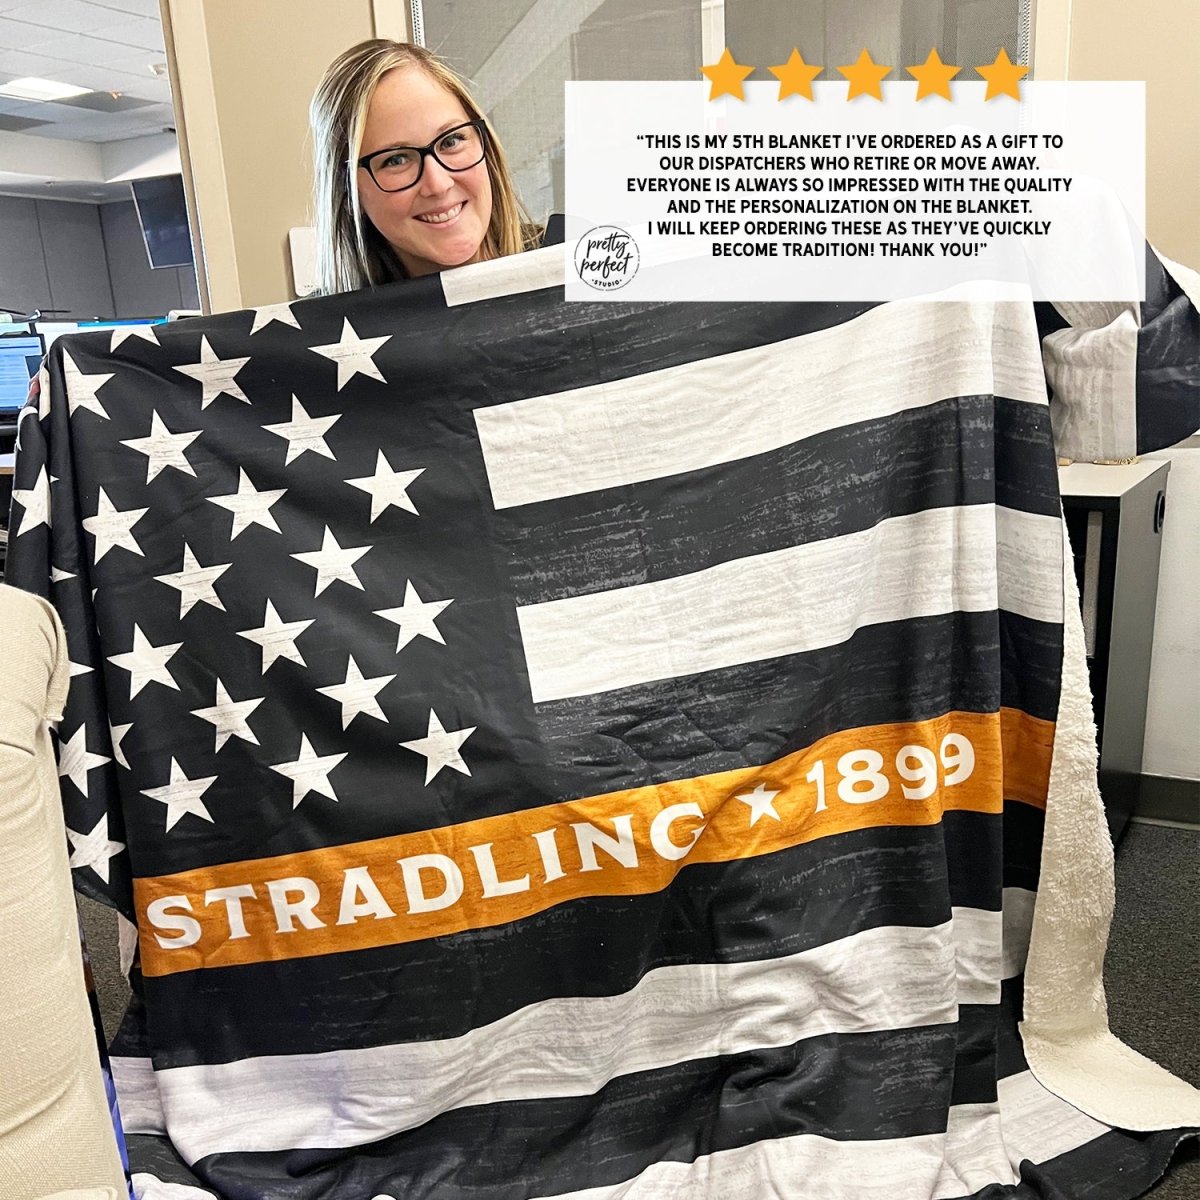 Customer product review for Custom Thin Gold Line Blanket for Dispatchers by Pretty Perfect Studio